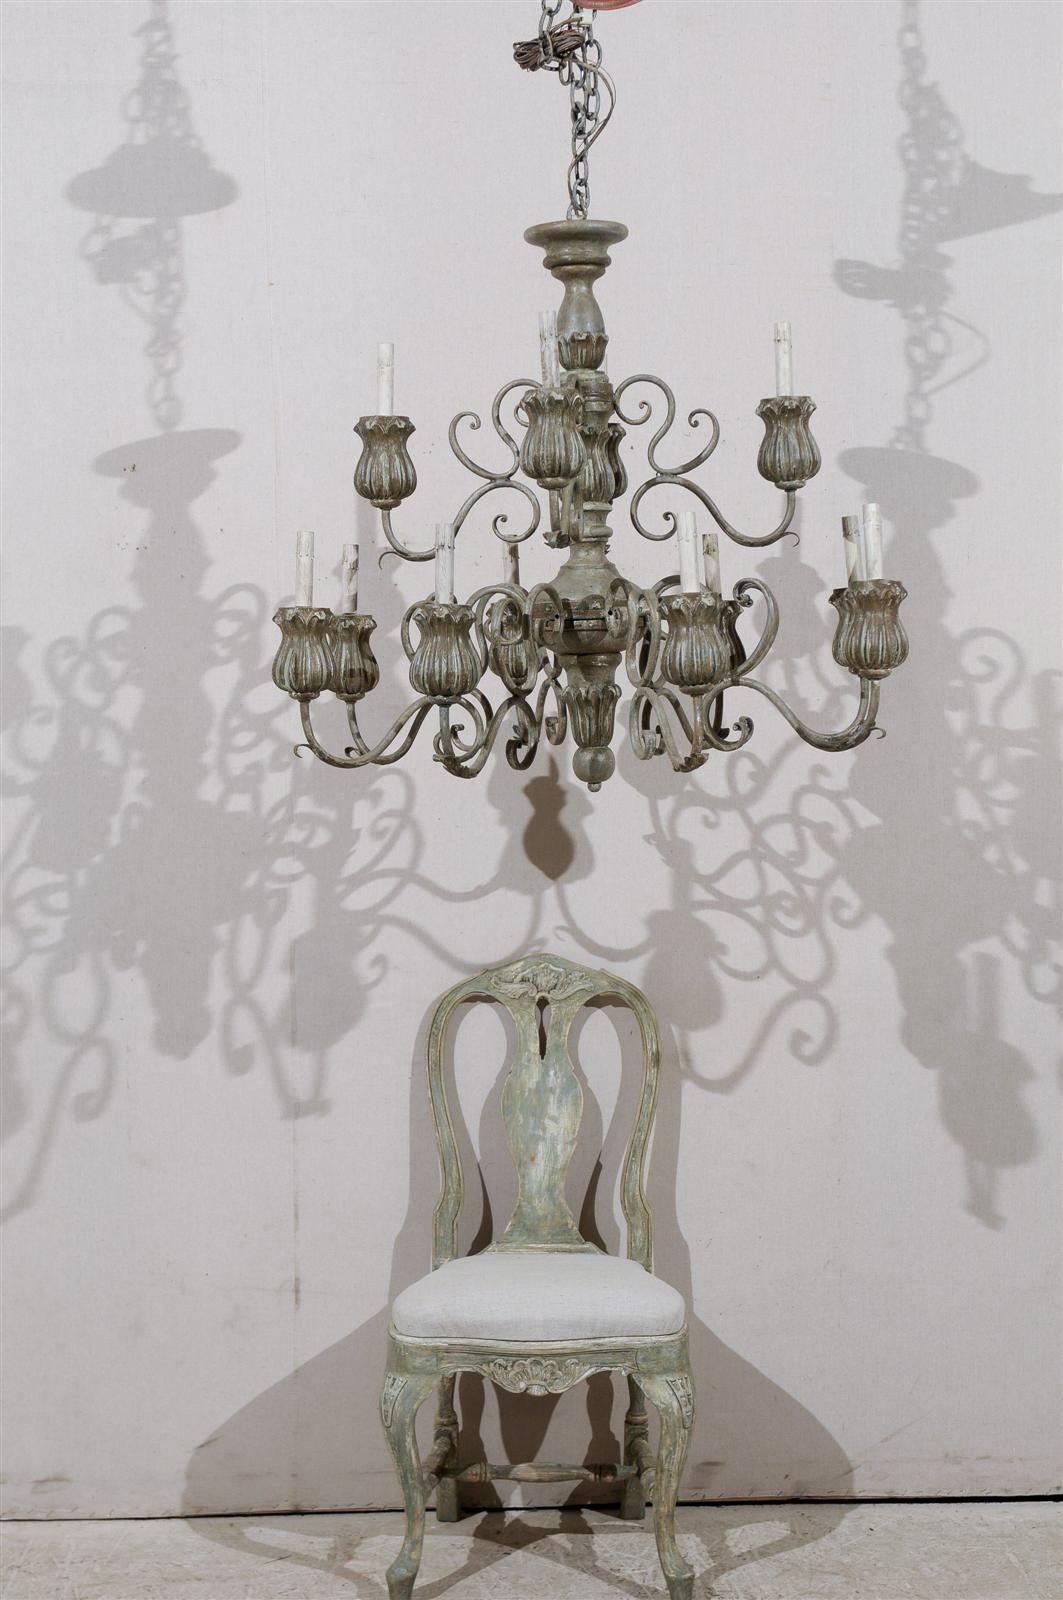 An Italian twelve-light painted wood chandelier of grey green color with central carved wood column. The arms are organized on two levels and made of s-scroll Motifs. The bobèches are shaped like exquisite tulip flowers. 20th century. This Italian